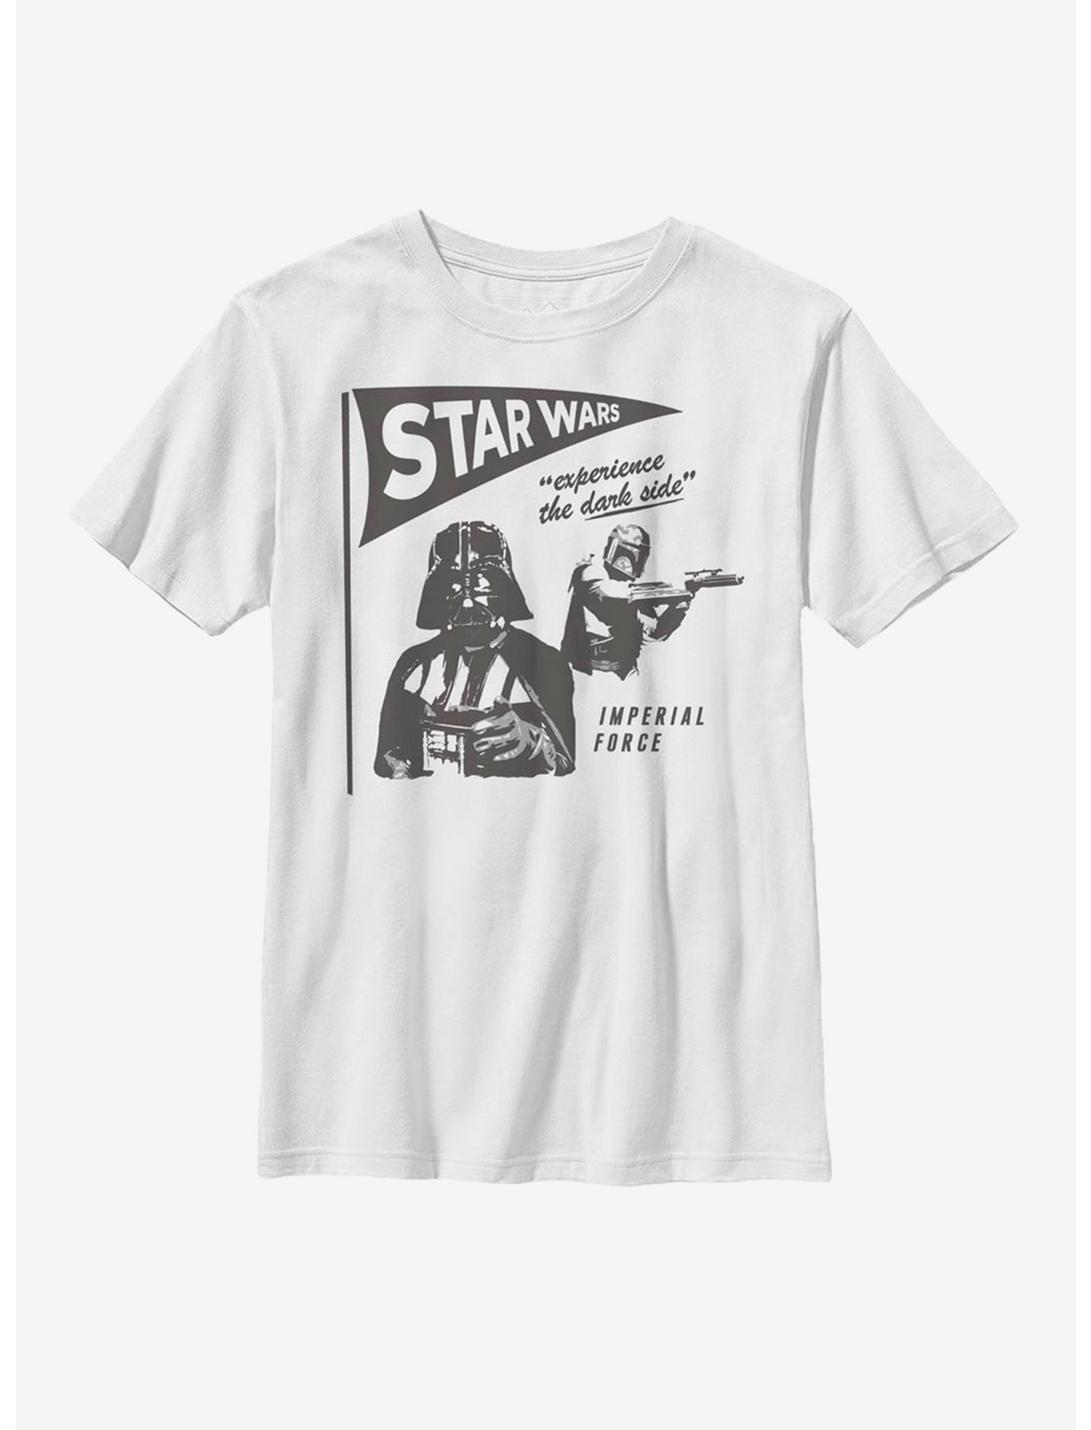 Star Wars Vader Experience The Dark Side Youth T-Shirt, WHITE, hi-res